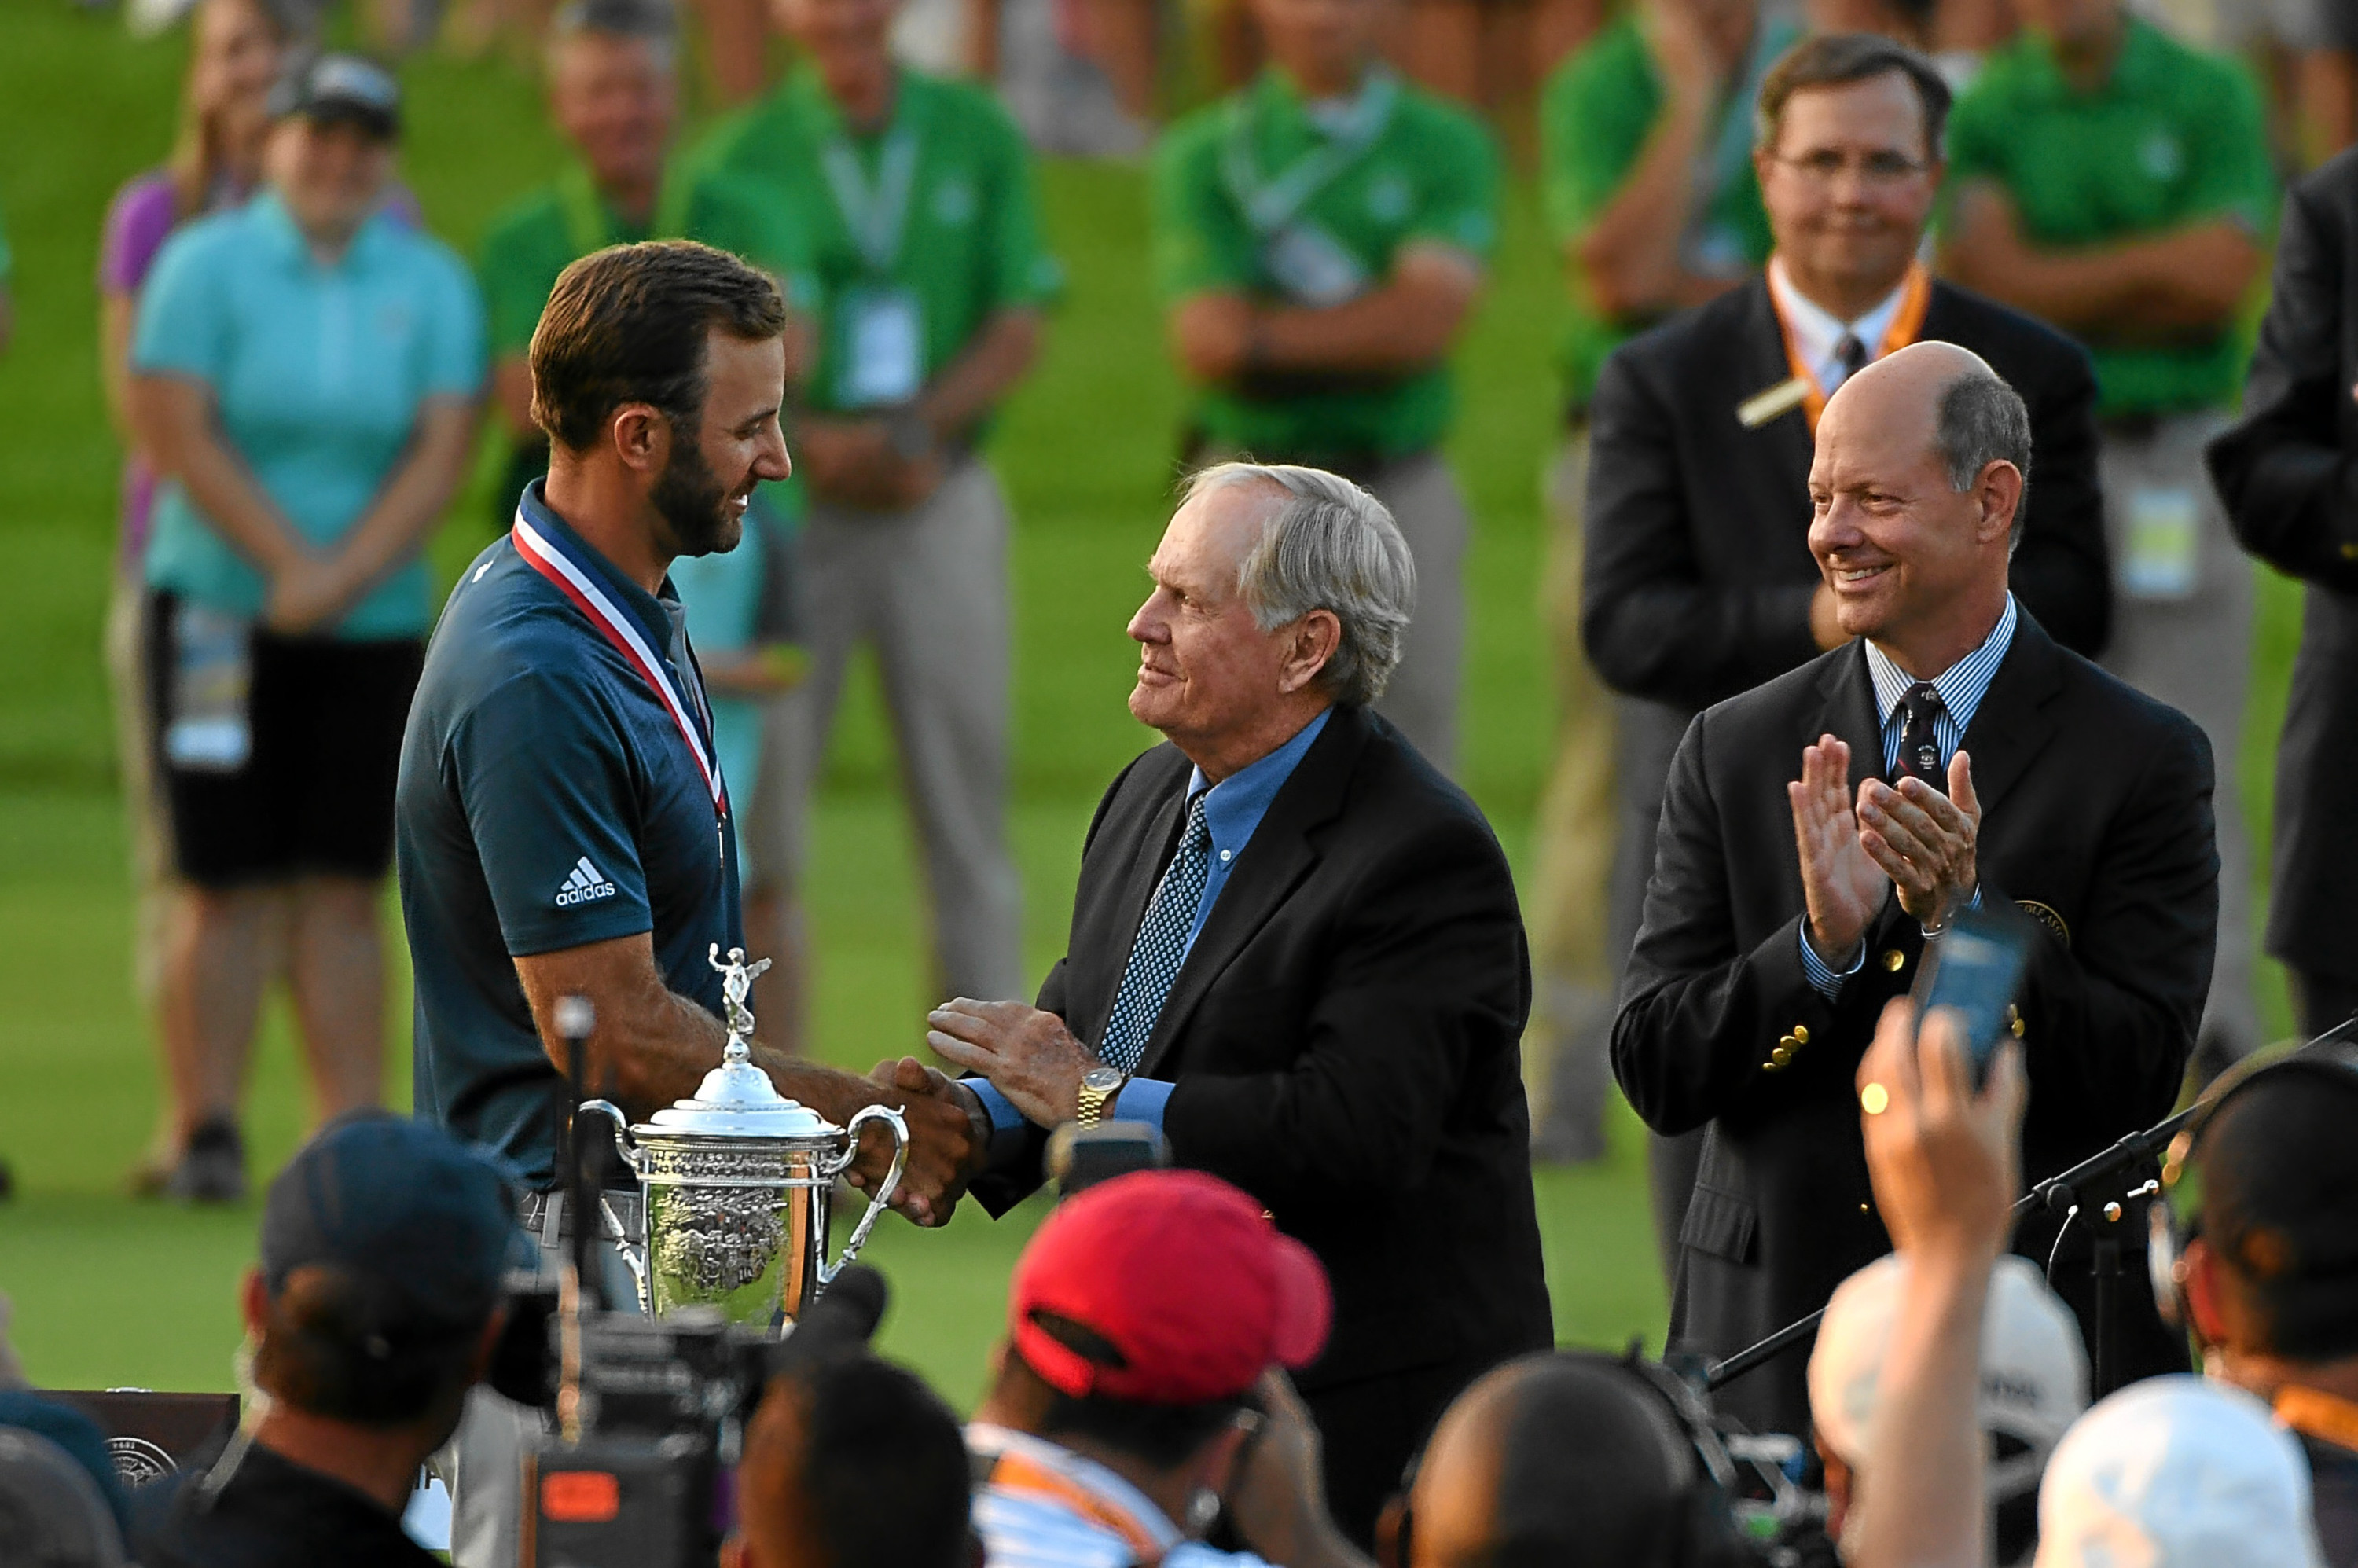 OAKMONT, PA - JUNE 19:  Dustin Johnson of the United States celebrates alongside Jack Nicklaus after winning the U.S. Open at Oakmont Country Club on June 19, 2016 in Oakmont, Pennsylvania.  (Photo by Ross Kinnaird/Getty Images)